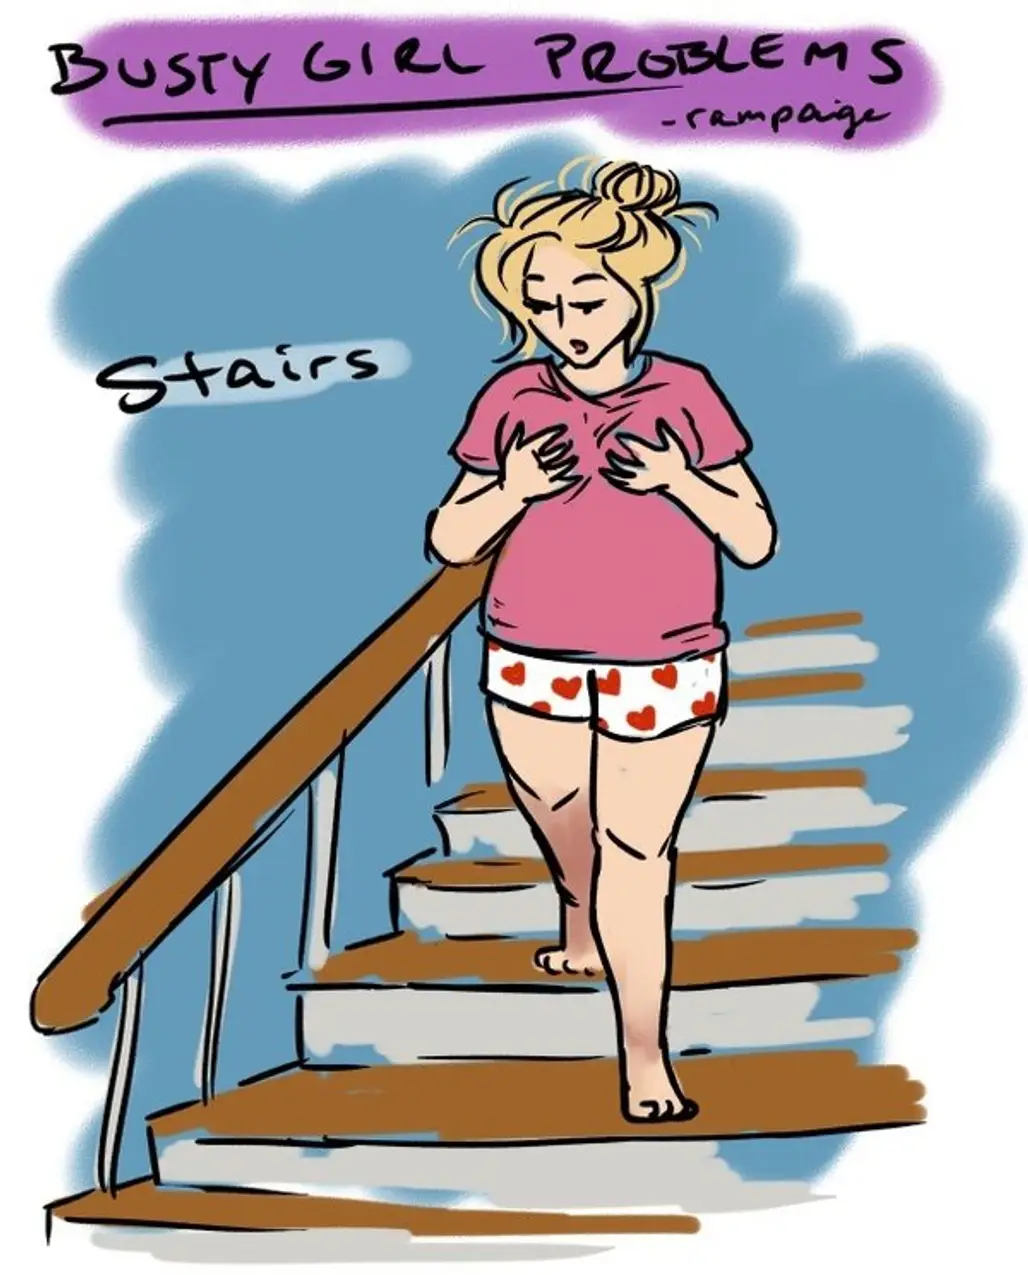 Walking down the Stairs? You Better Hold on Tight!